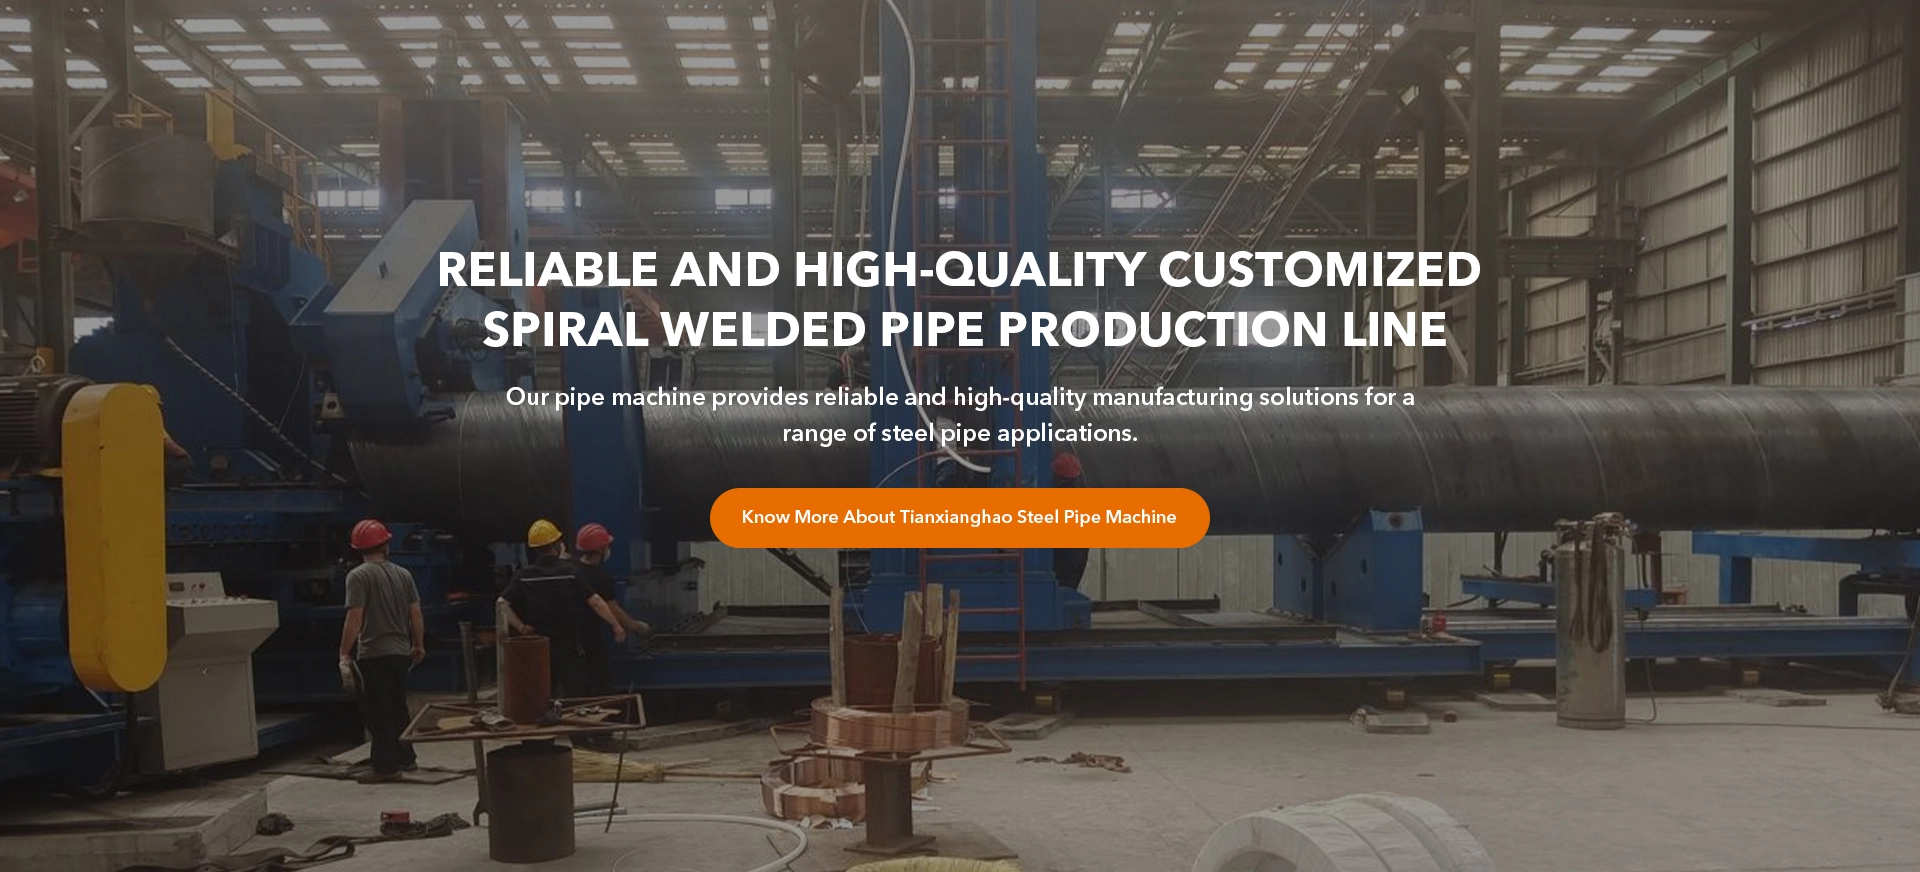 Reliable And High-Quality Customized Spiral Welded Pipe Production Line